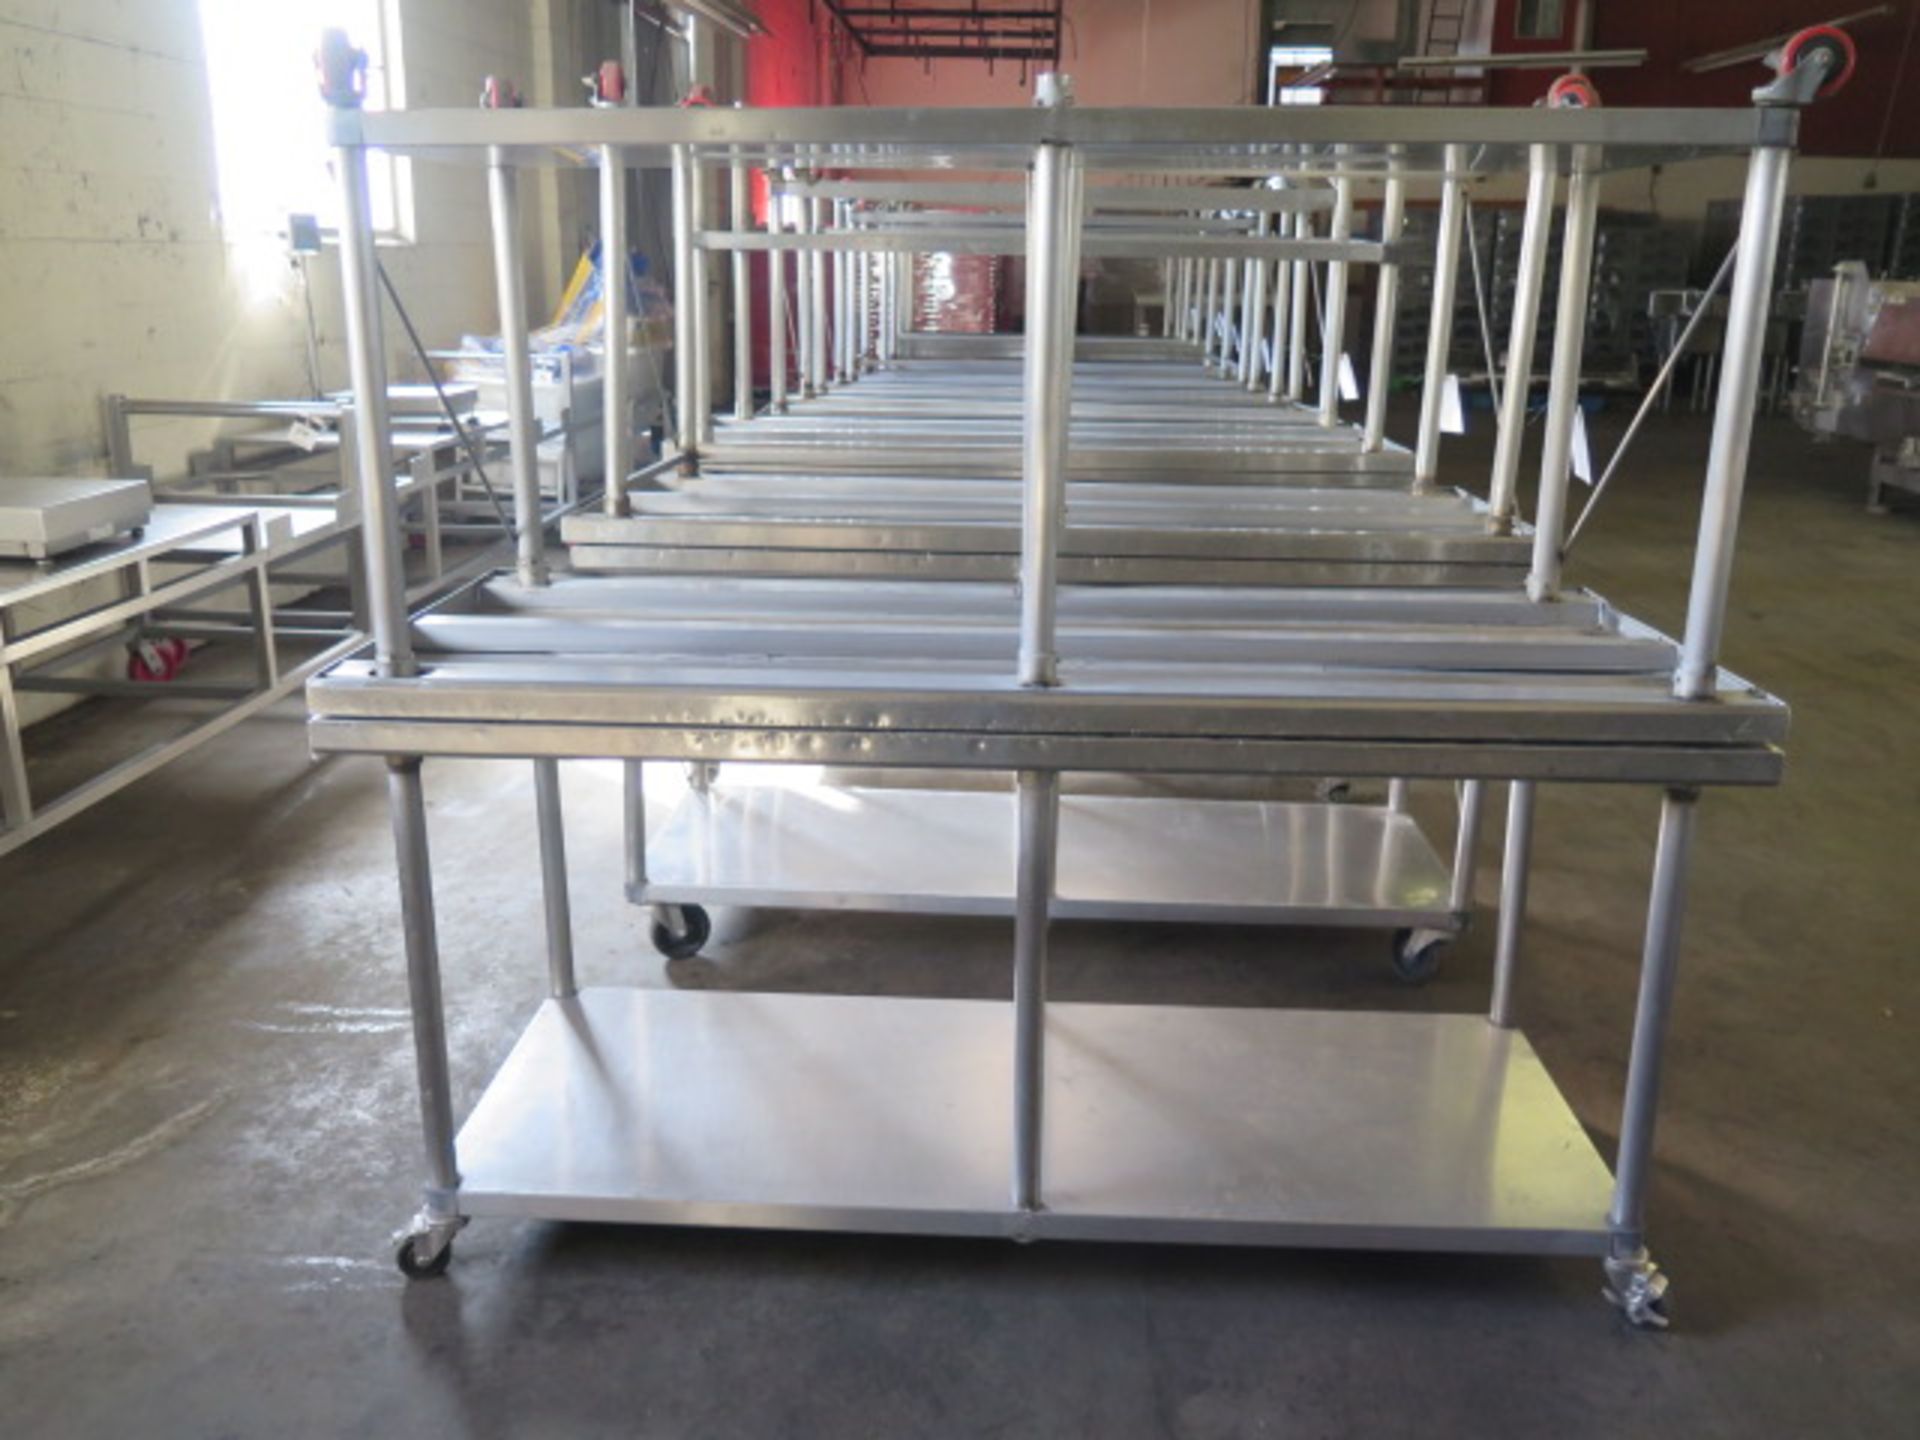 30” x 72” Rolling Stainless Steel Tables (2)